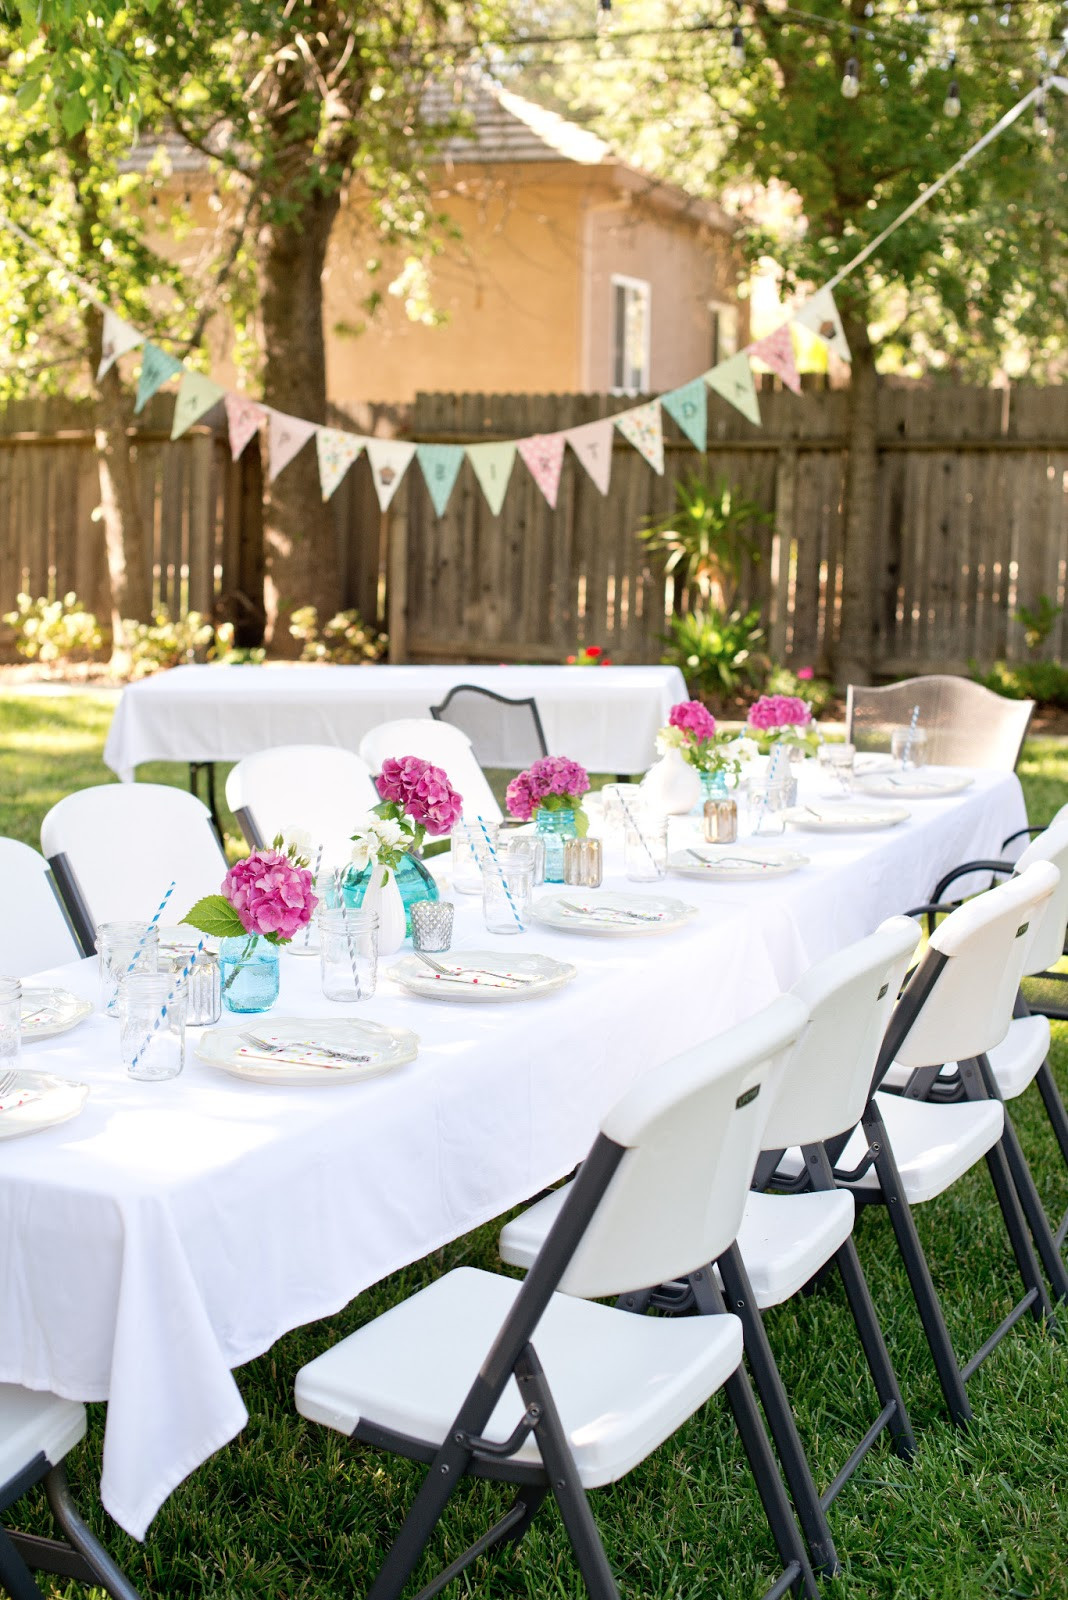 Ideas For Backyard Birthday Party
 Backyard Party Decorations For Unfor table Moments